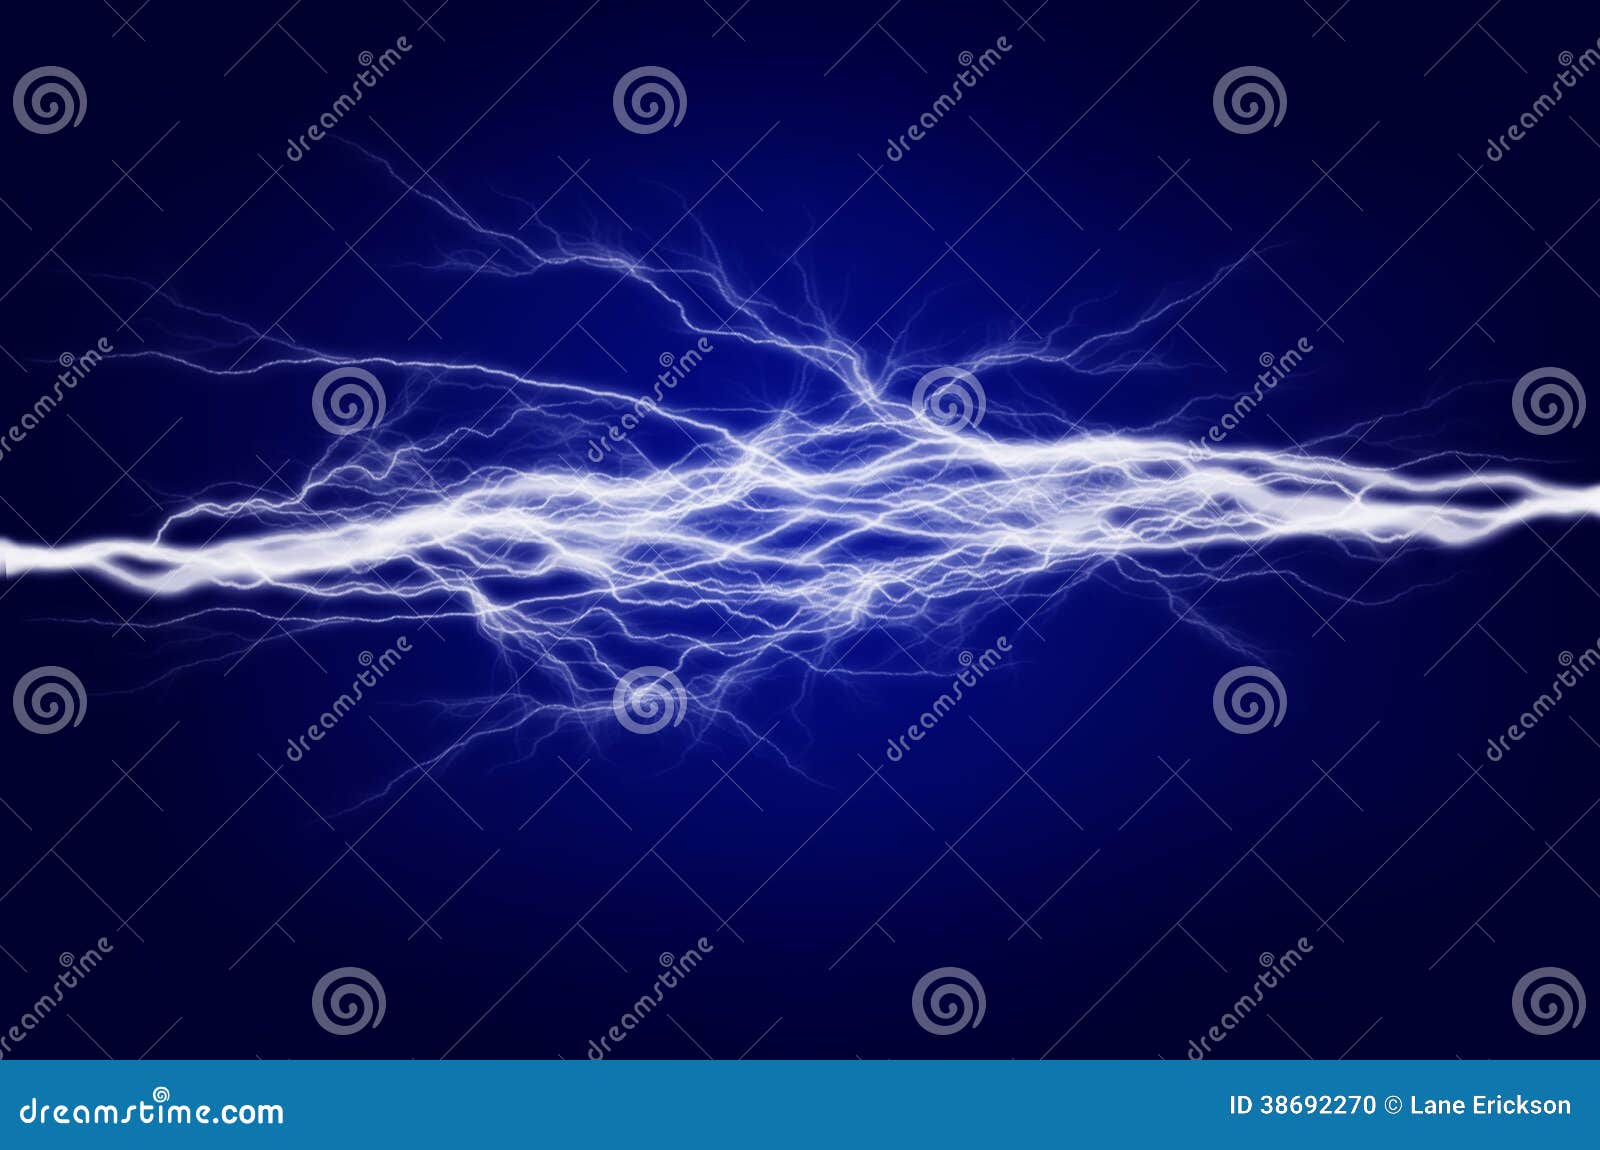 pure energy and electricity